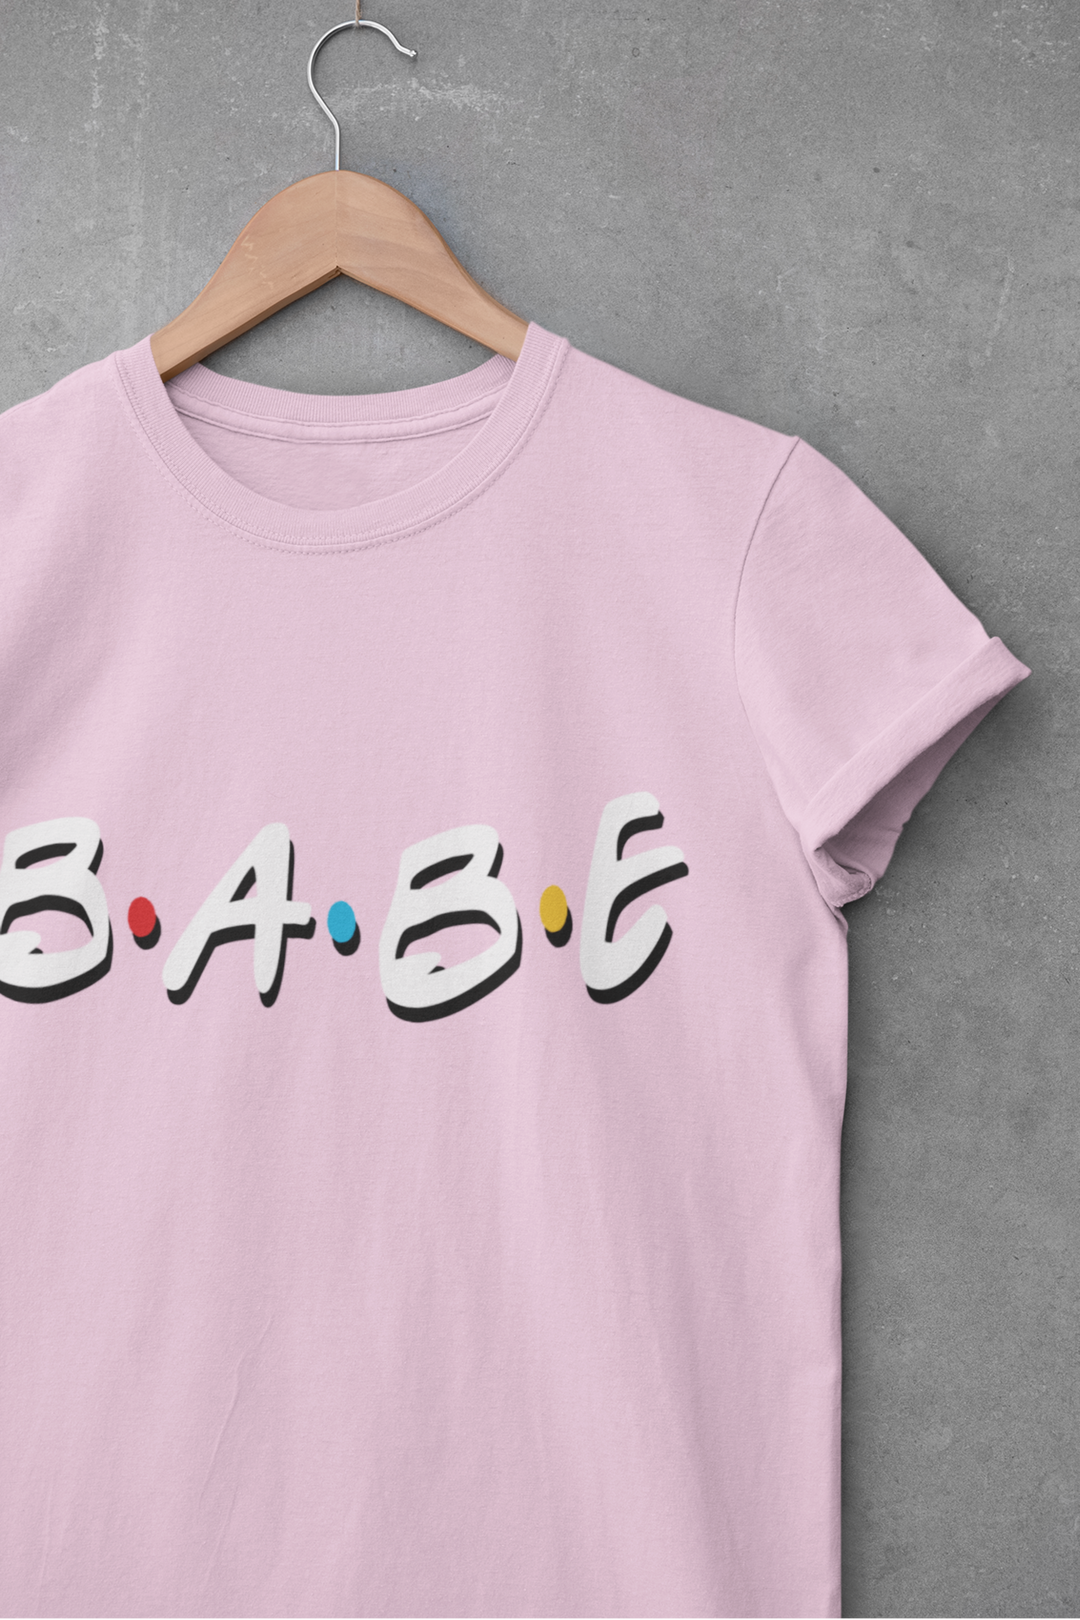 FRIENDS The one where you buy Bachelorette Party Shirts